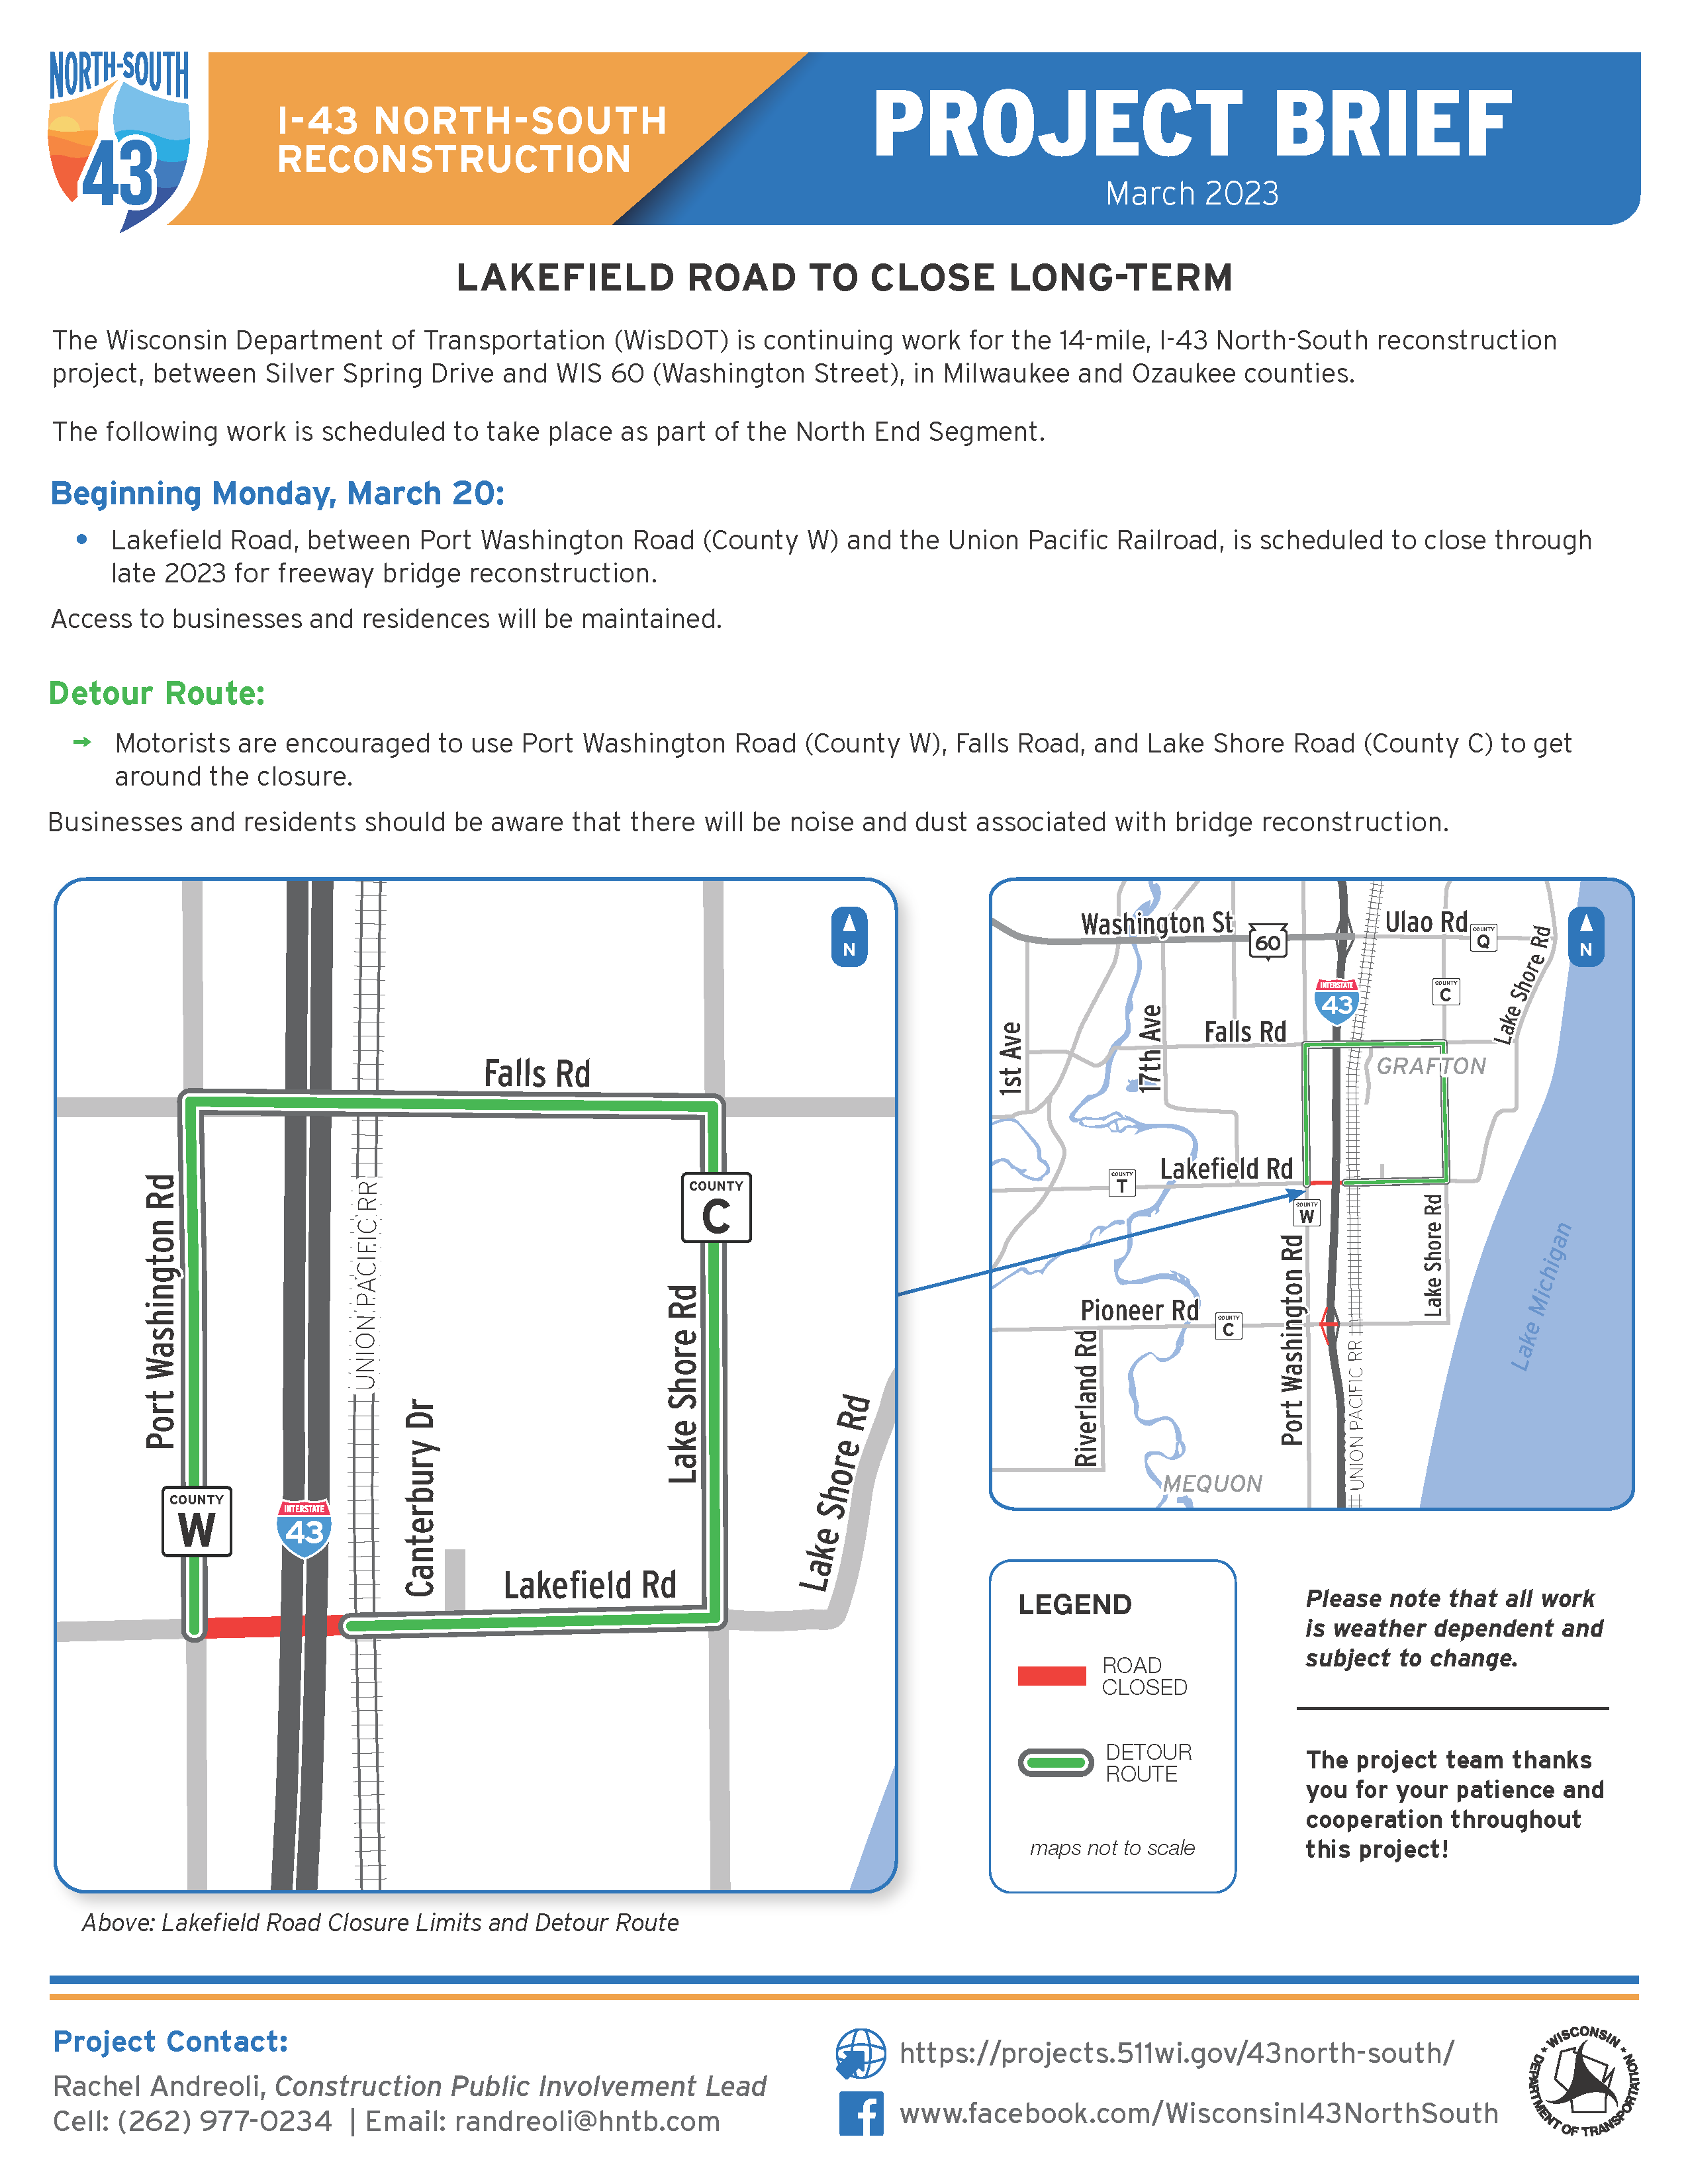 March 20, Lakefield Road to Close Long-Term